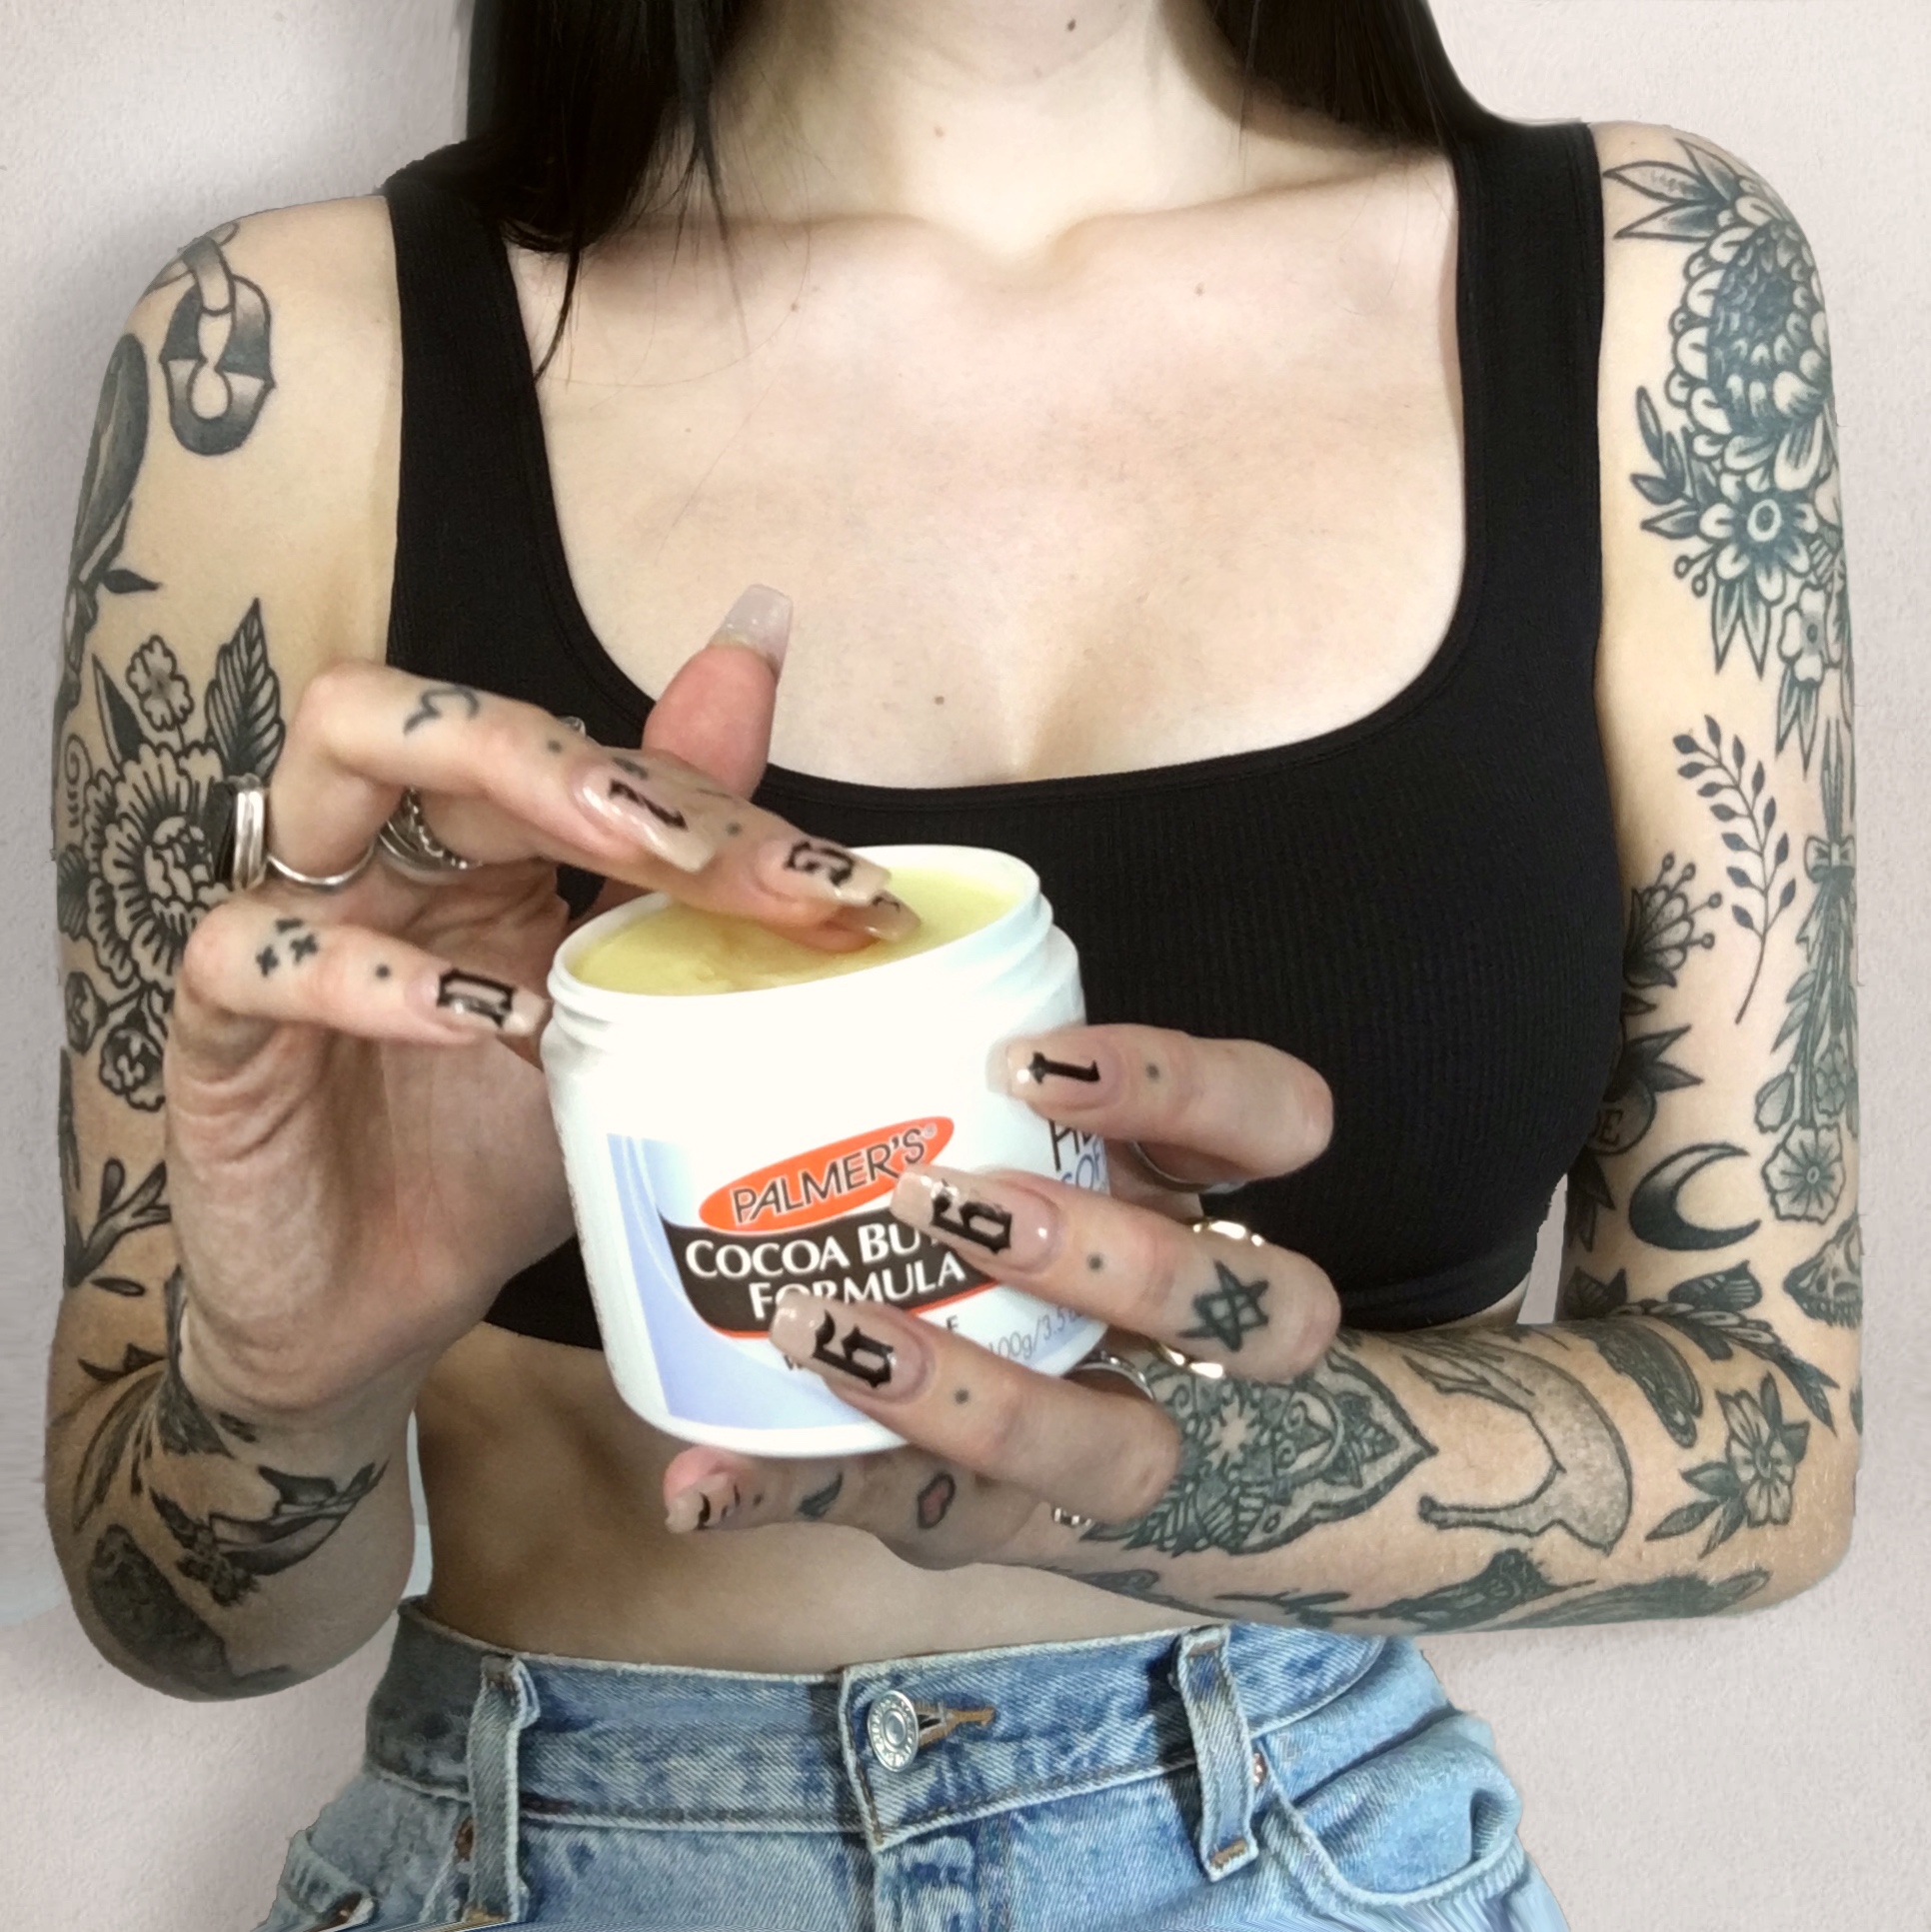 Palmer's Cocoa Butter Formula Original Solid Jar keeps tattoos hydrated